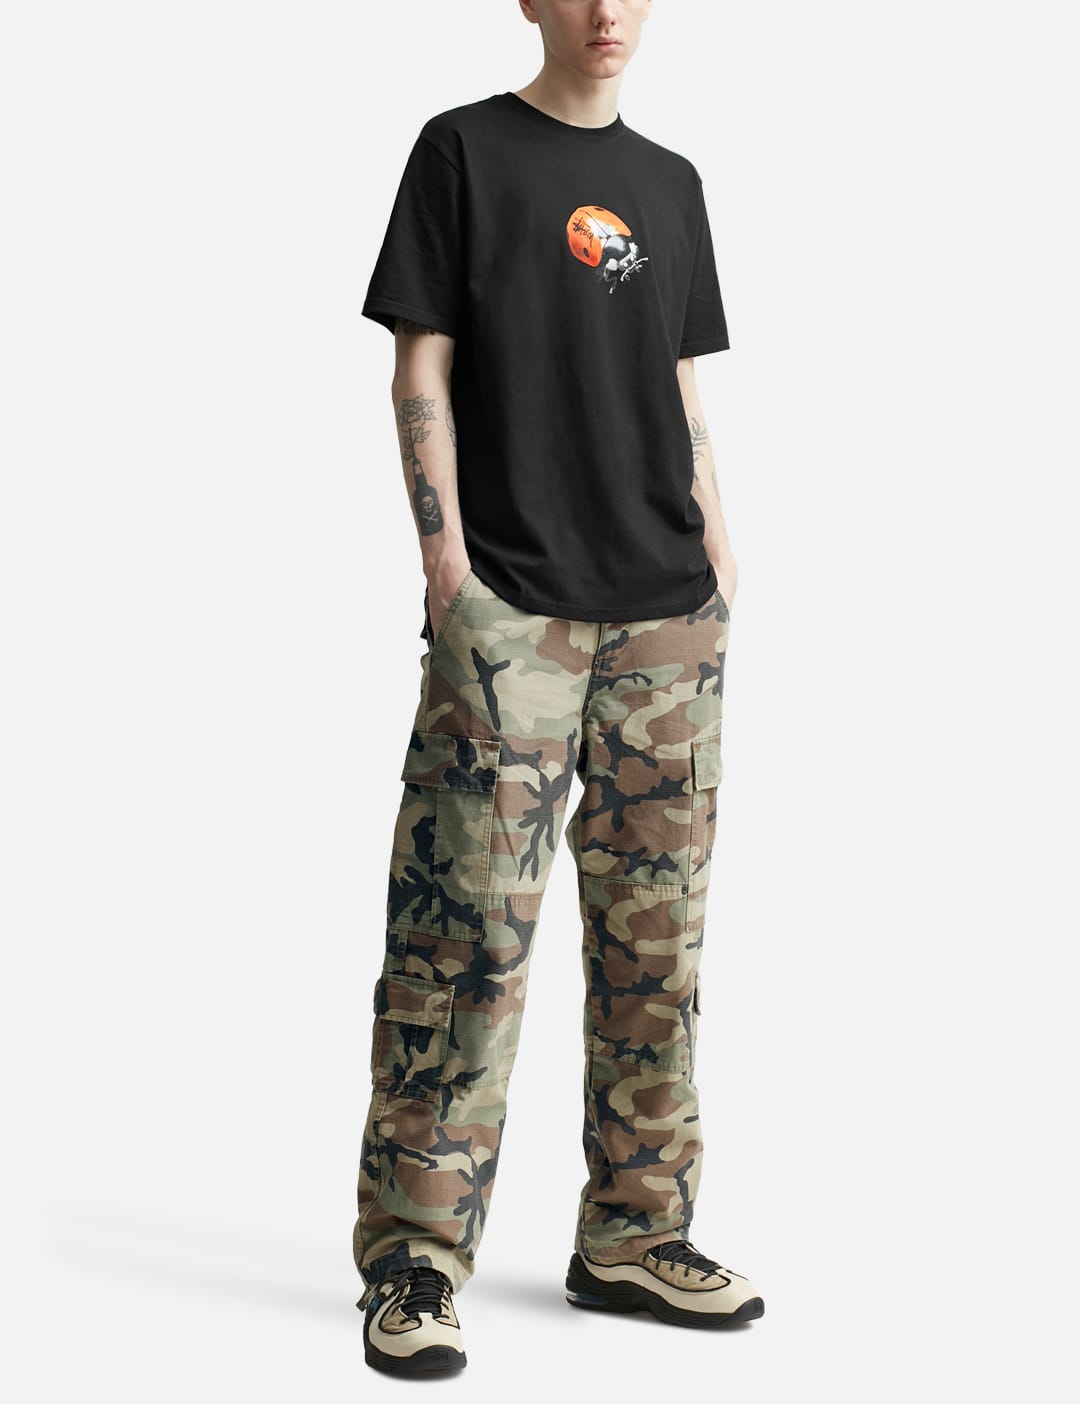 Stüssy - Ripstop Surplus Cargo Pants | HBX - Globally Curated 